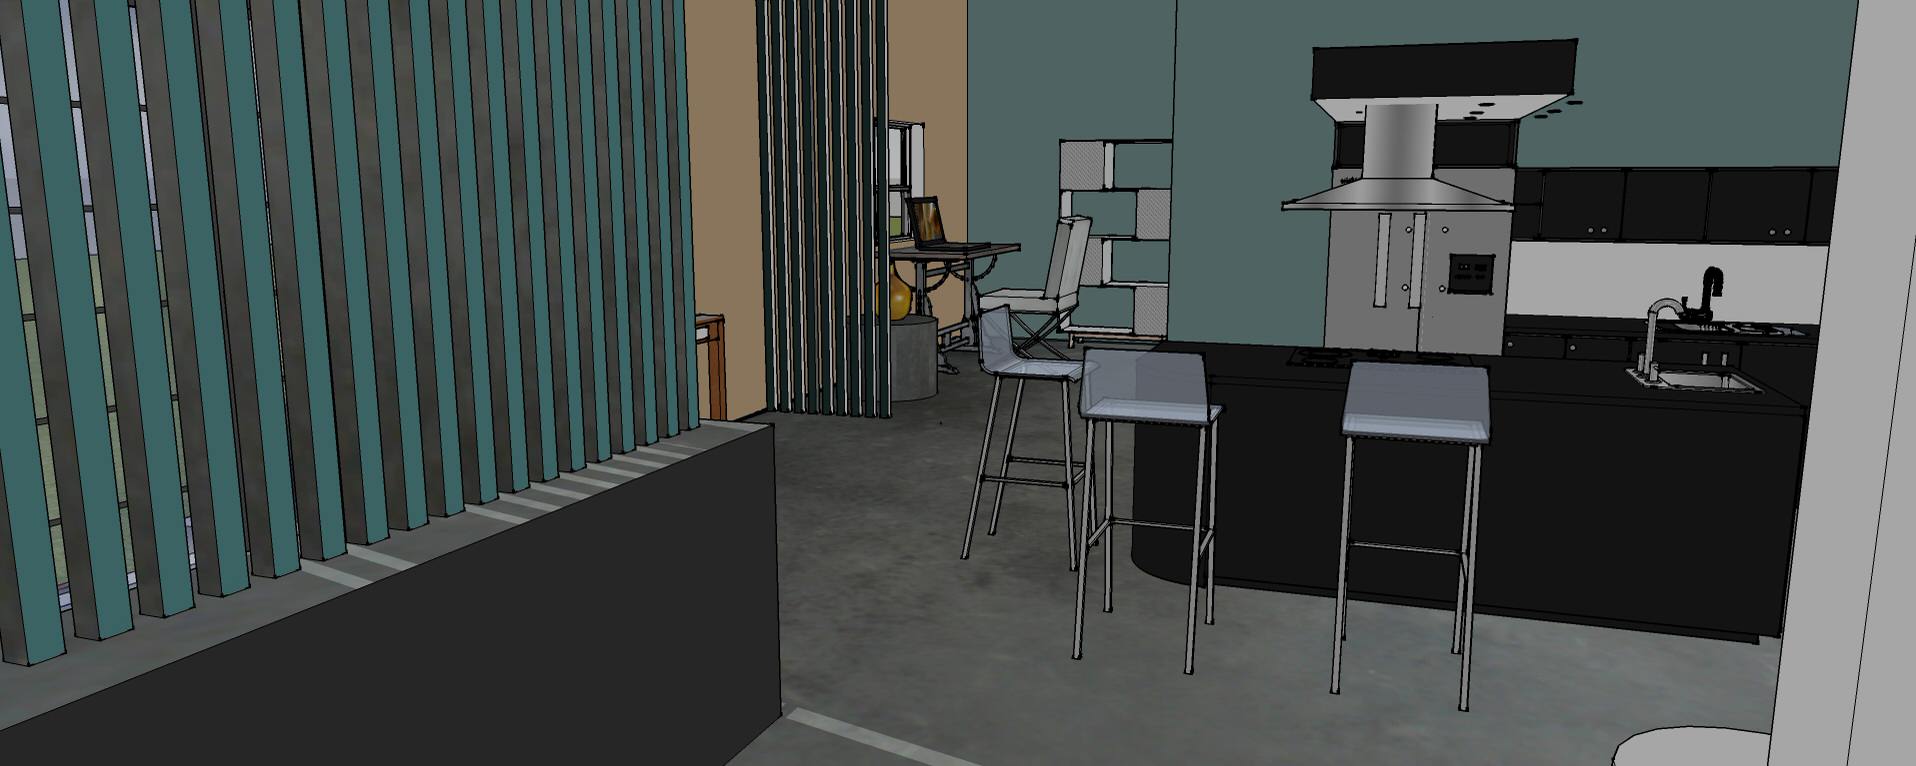 projet sous sketchup